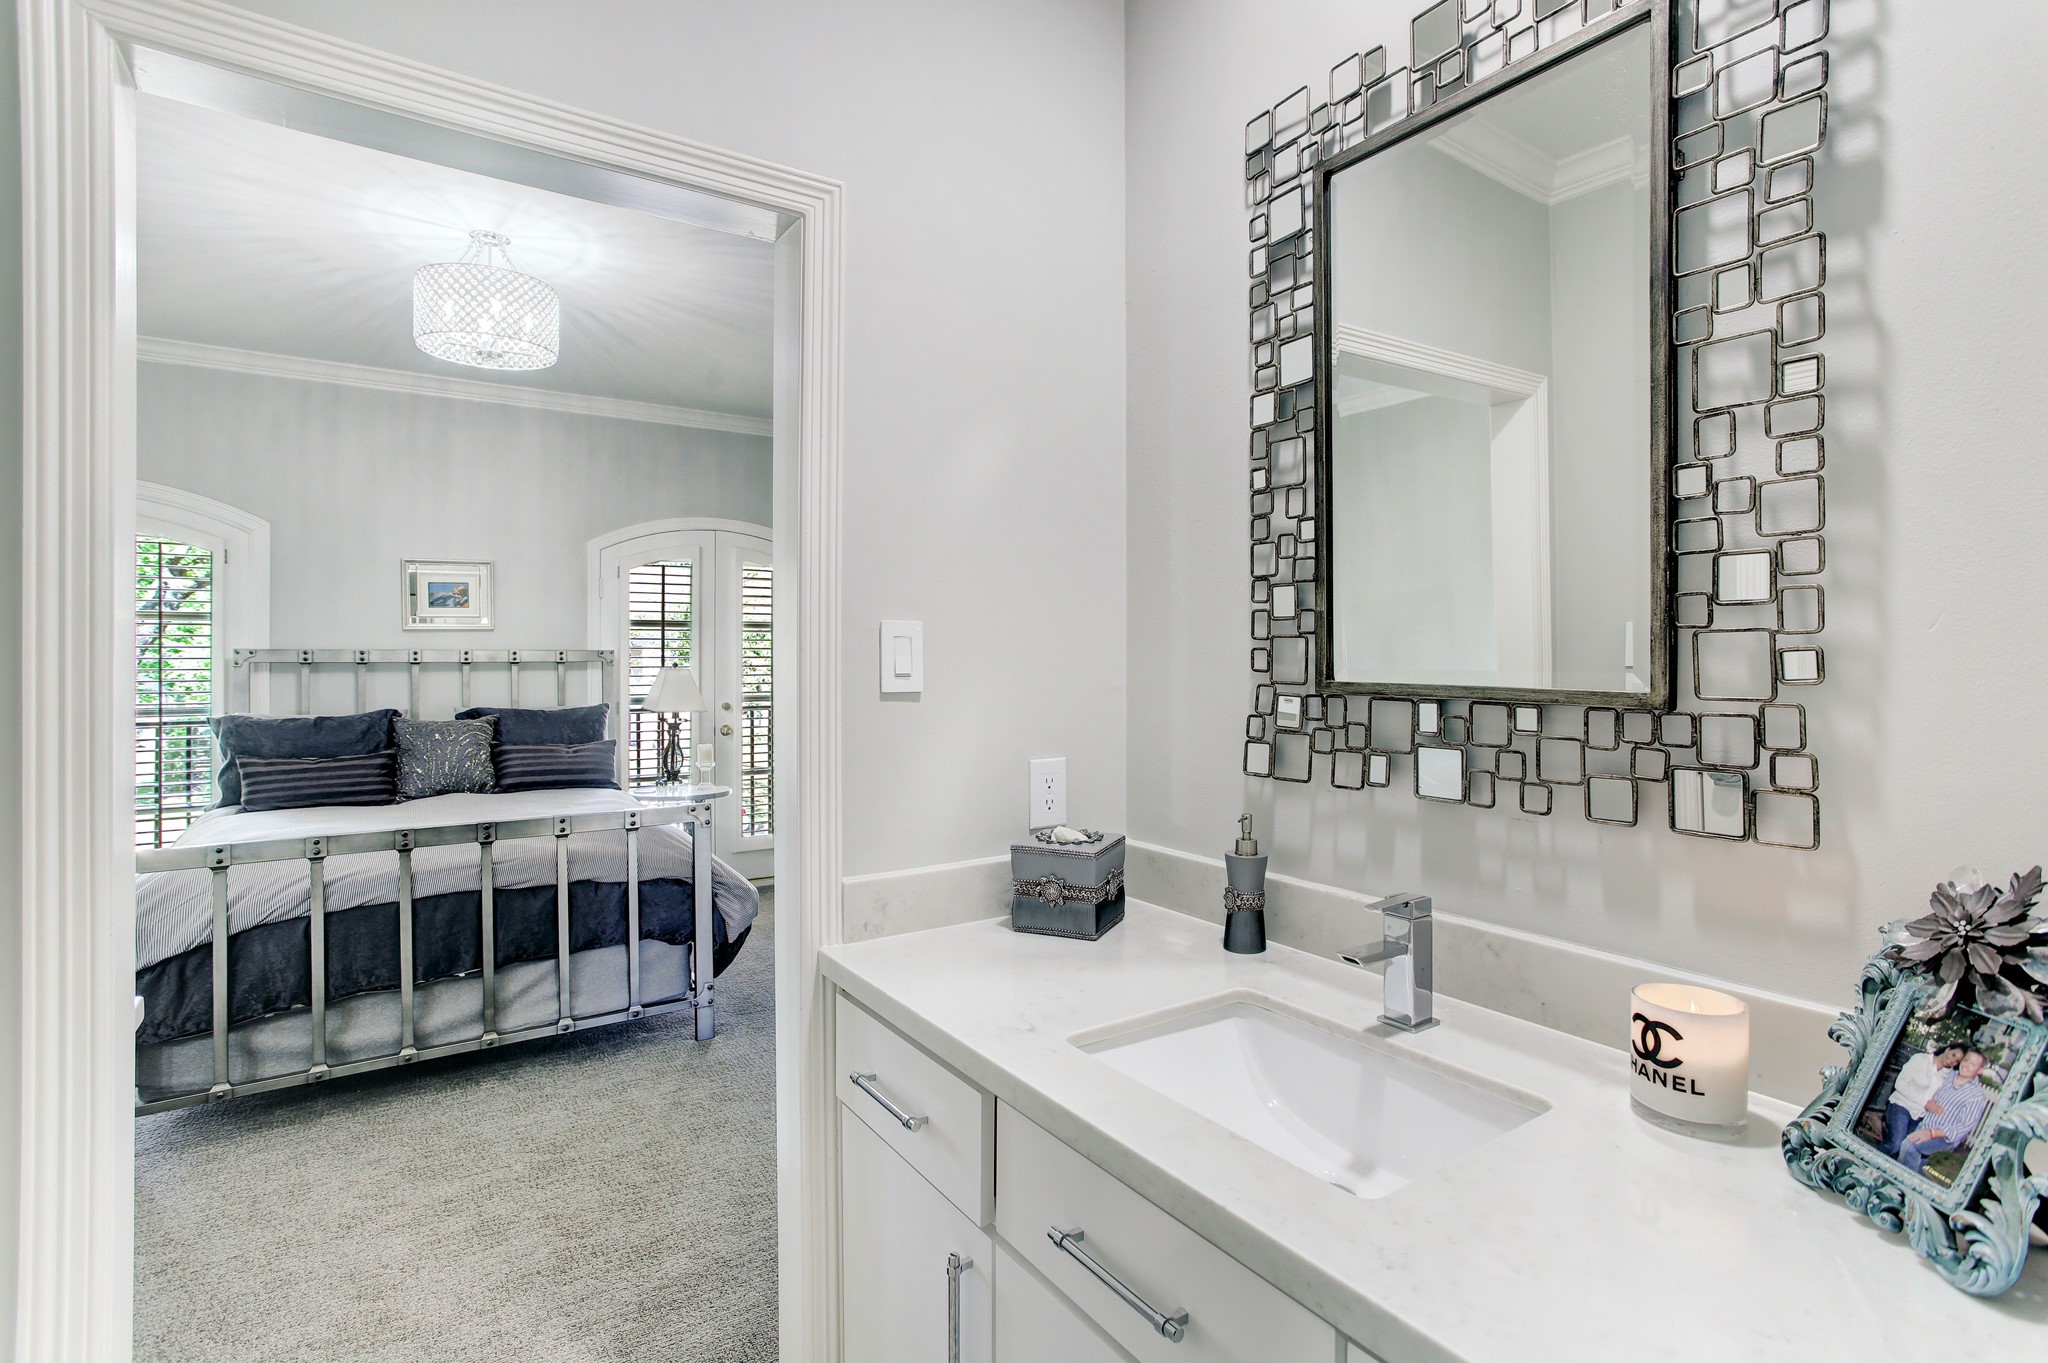 New vanity and counters were added to complete this room's renovation.